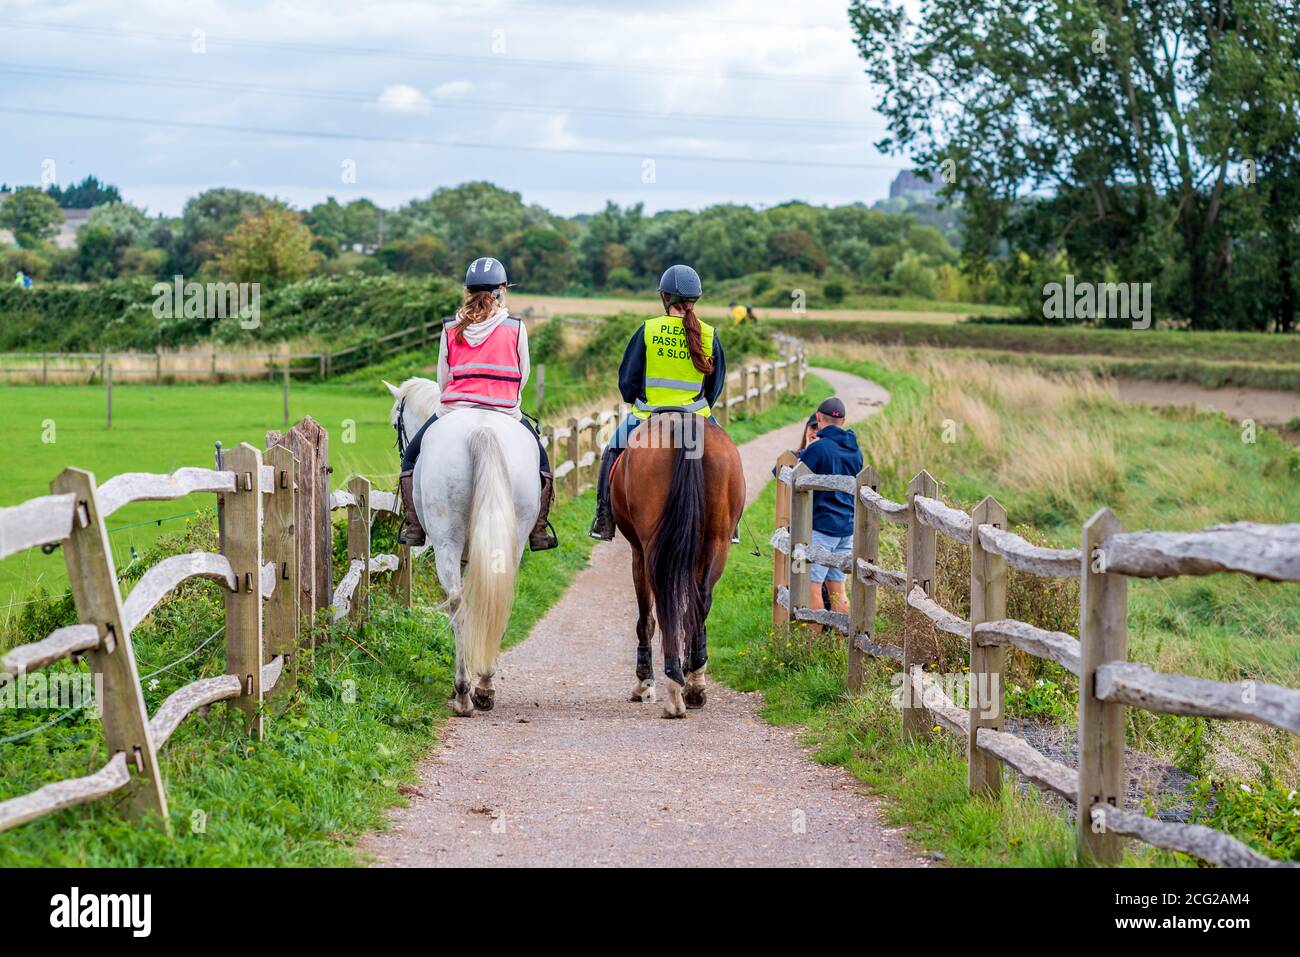 Girls with high visibility jackets on riding horses Stock Photo